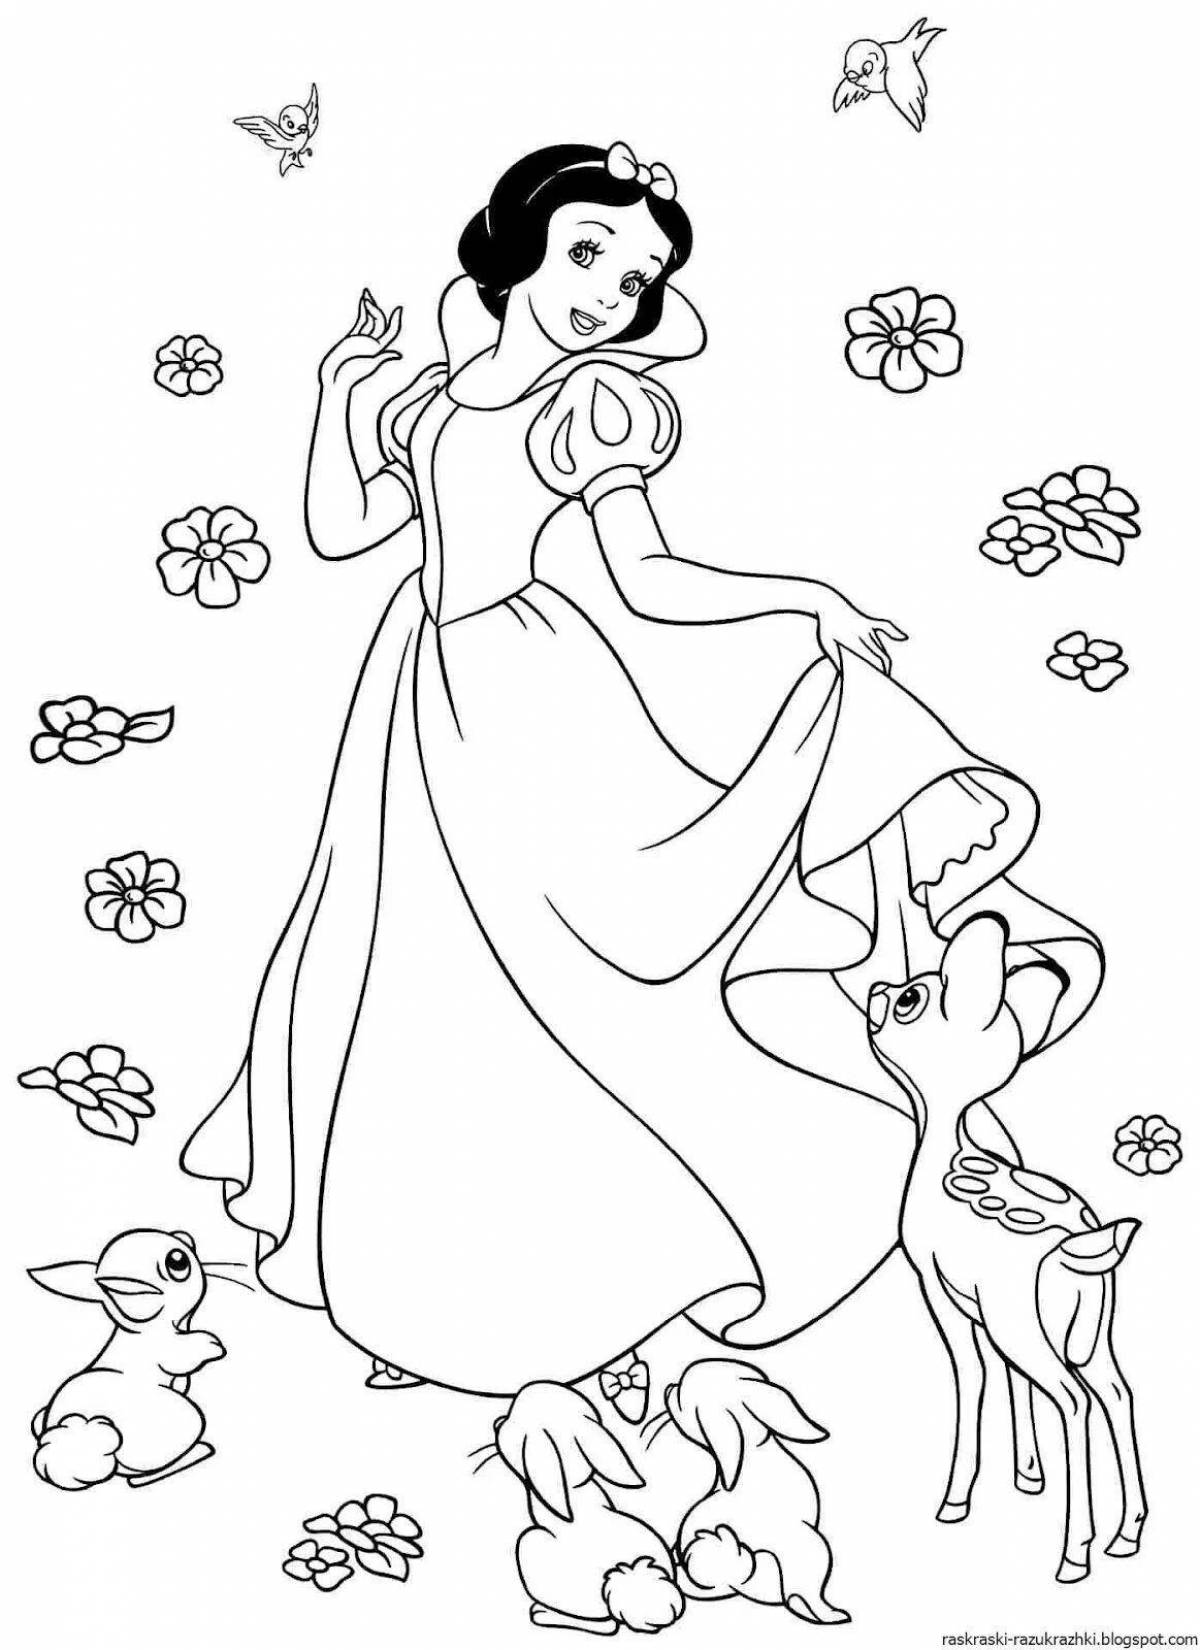 Charming coloring book for girls 5 years old, princess